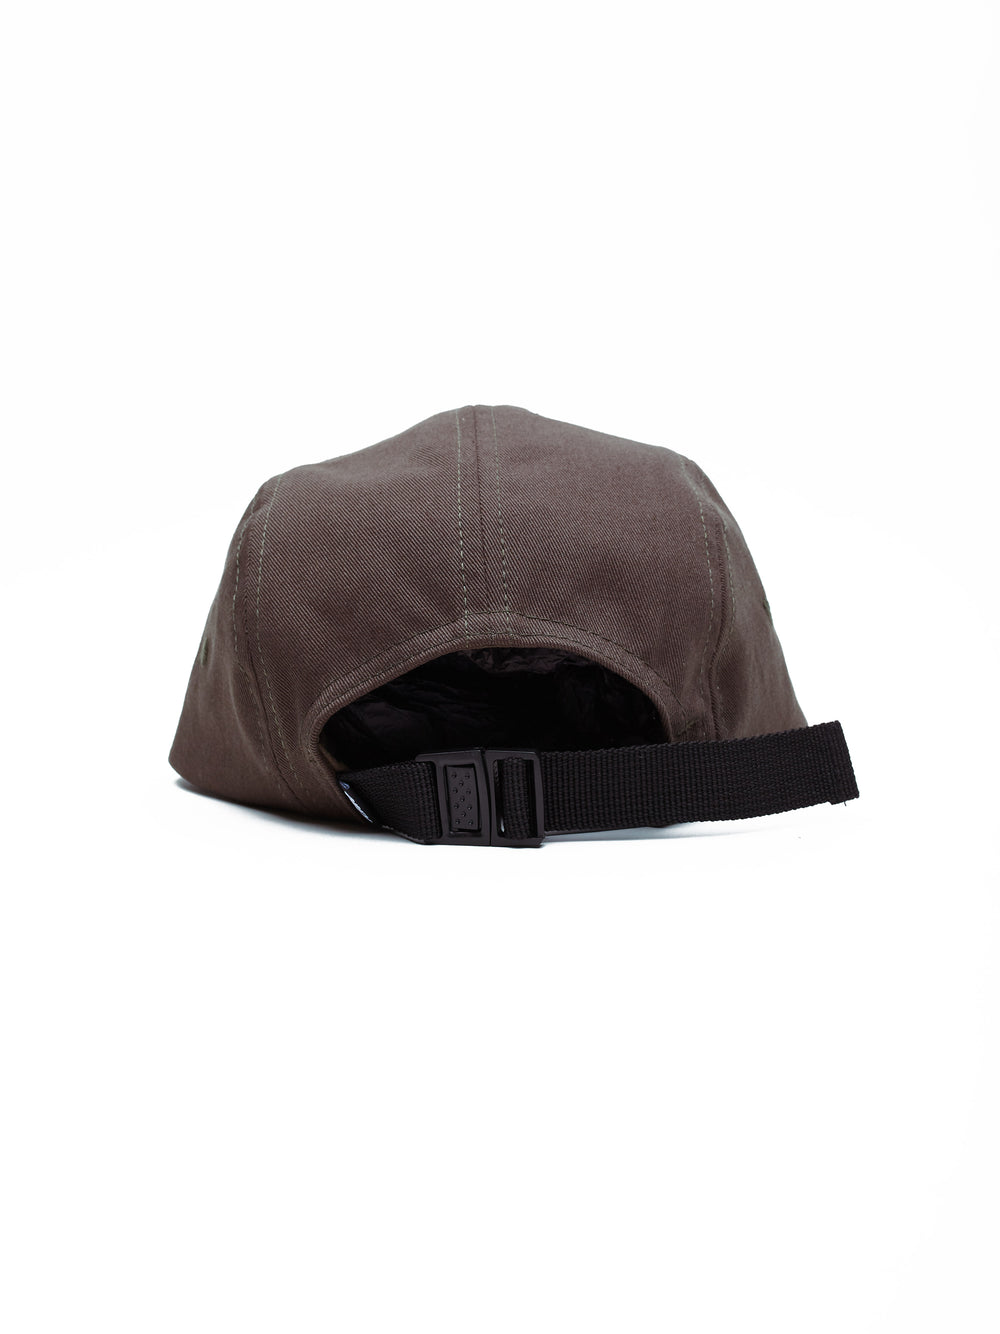 Integrity 5 Panel Hat / Army - West of Camden